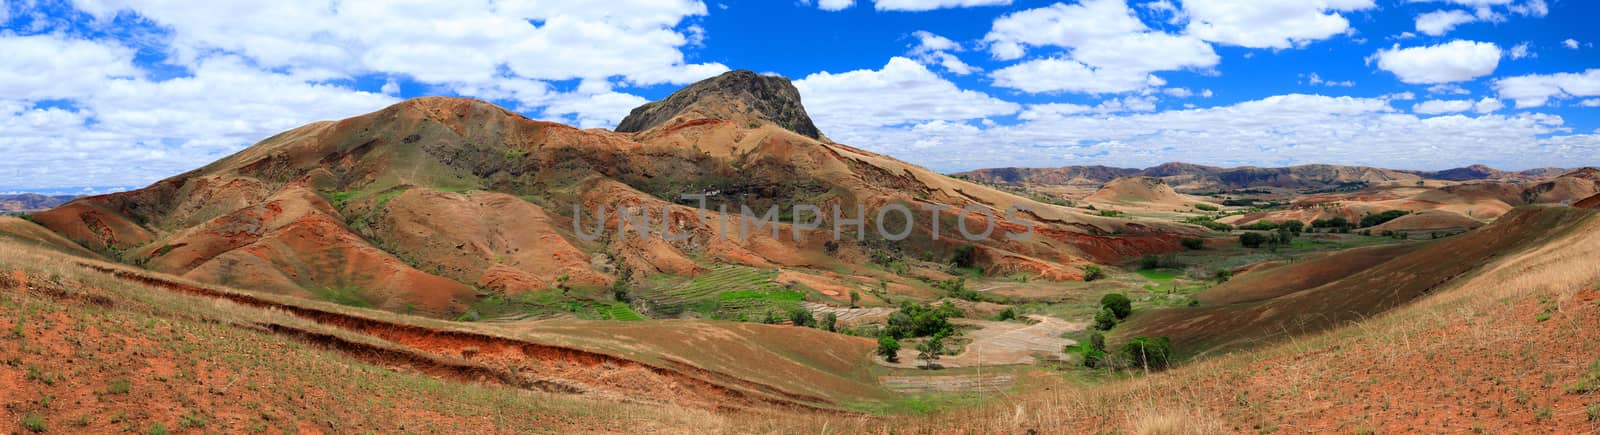 Madagascar highland countryside landscape. Deforestation in Madagascar creates agricultural or pastoral land but can also result ecology problem with soil and water. Madagascar Mahajanga Province